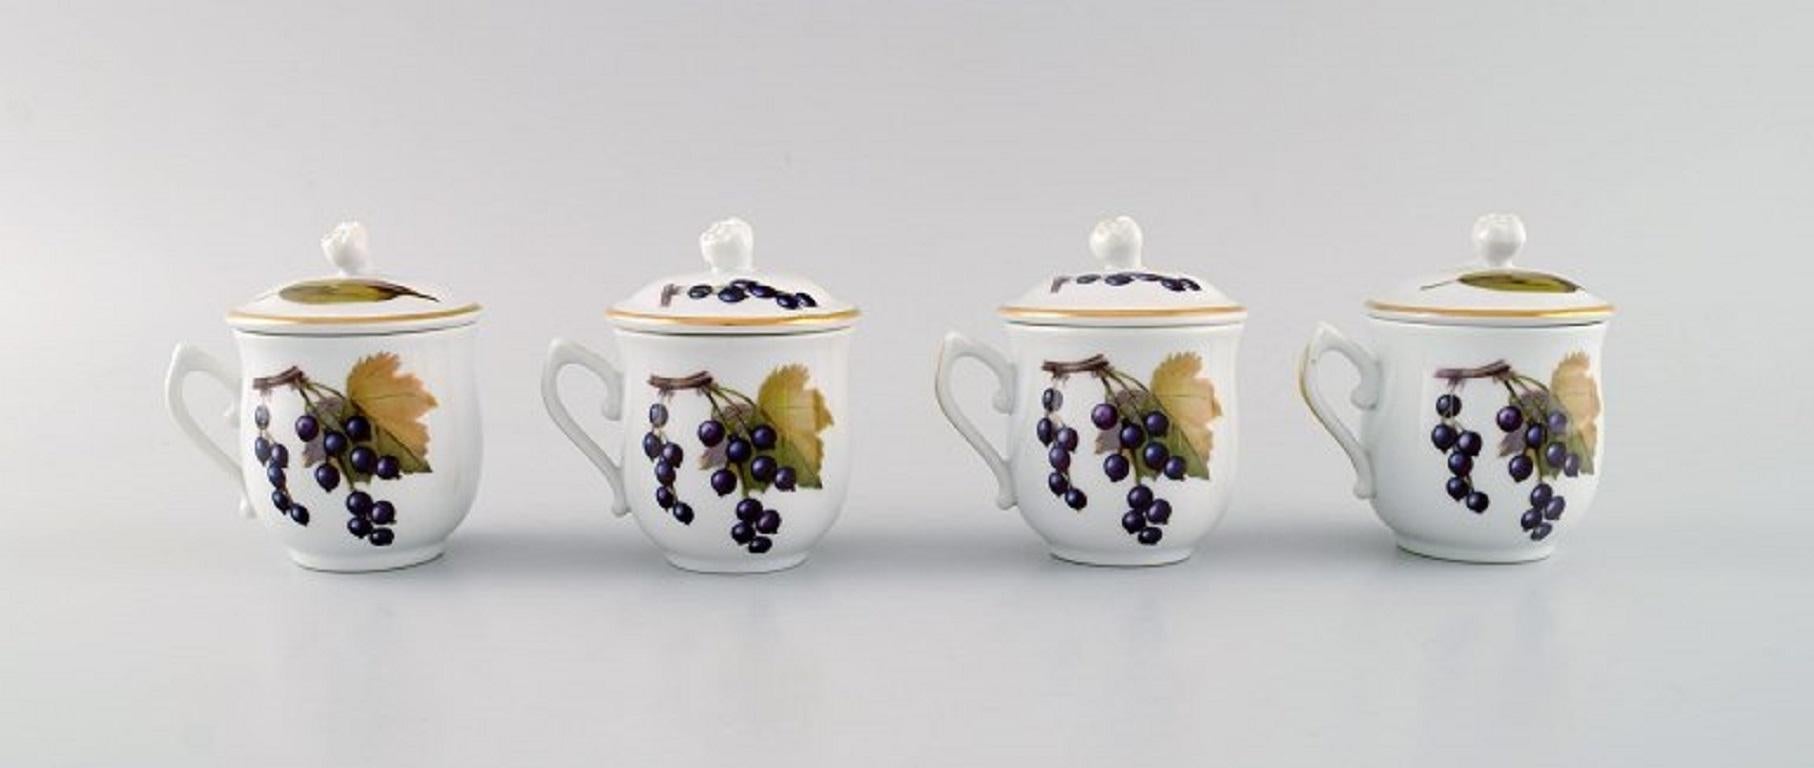 Royal Worcester, England. Four Evesham porcelain cream cups decorated with fruits and gold edge. 
1960s.
Measures: 8.5 x 7.7 cm.
In excellent condition.
Stamped.